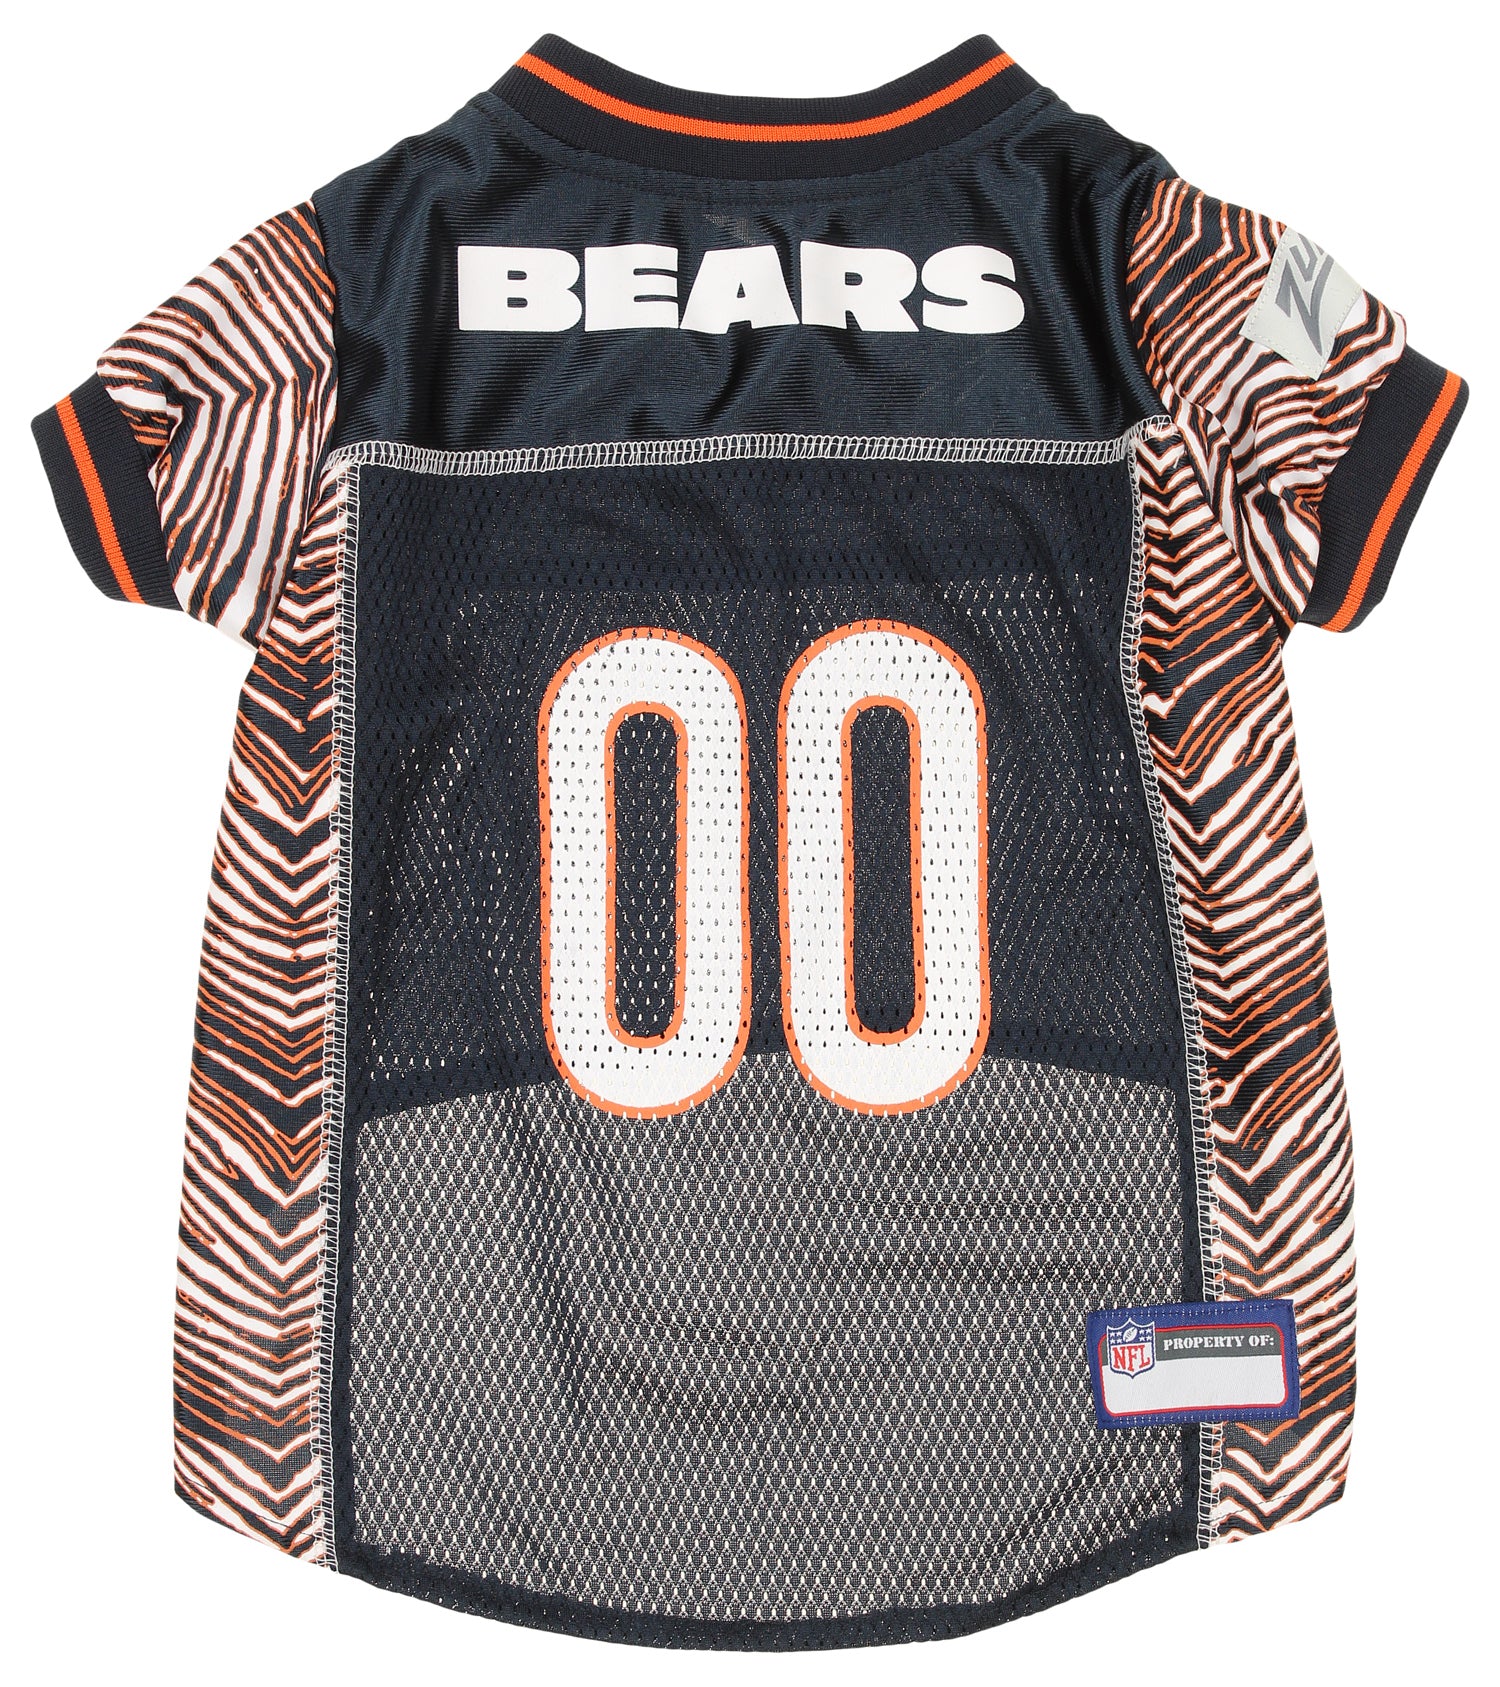 Zubaz NFL Team Pet Jersey for Dogs, Chicago Bears, Large, Print